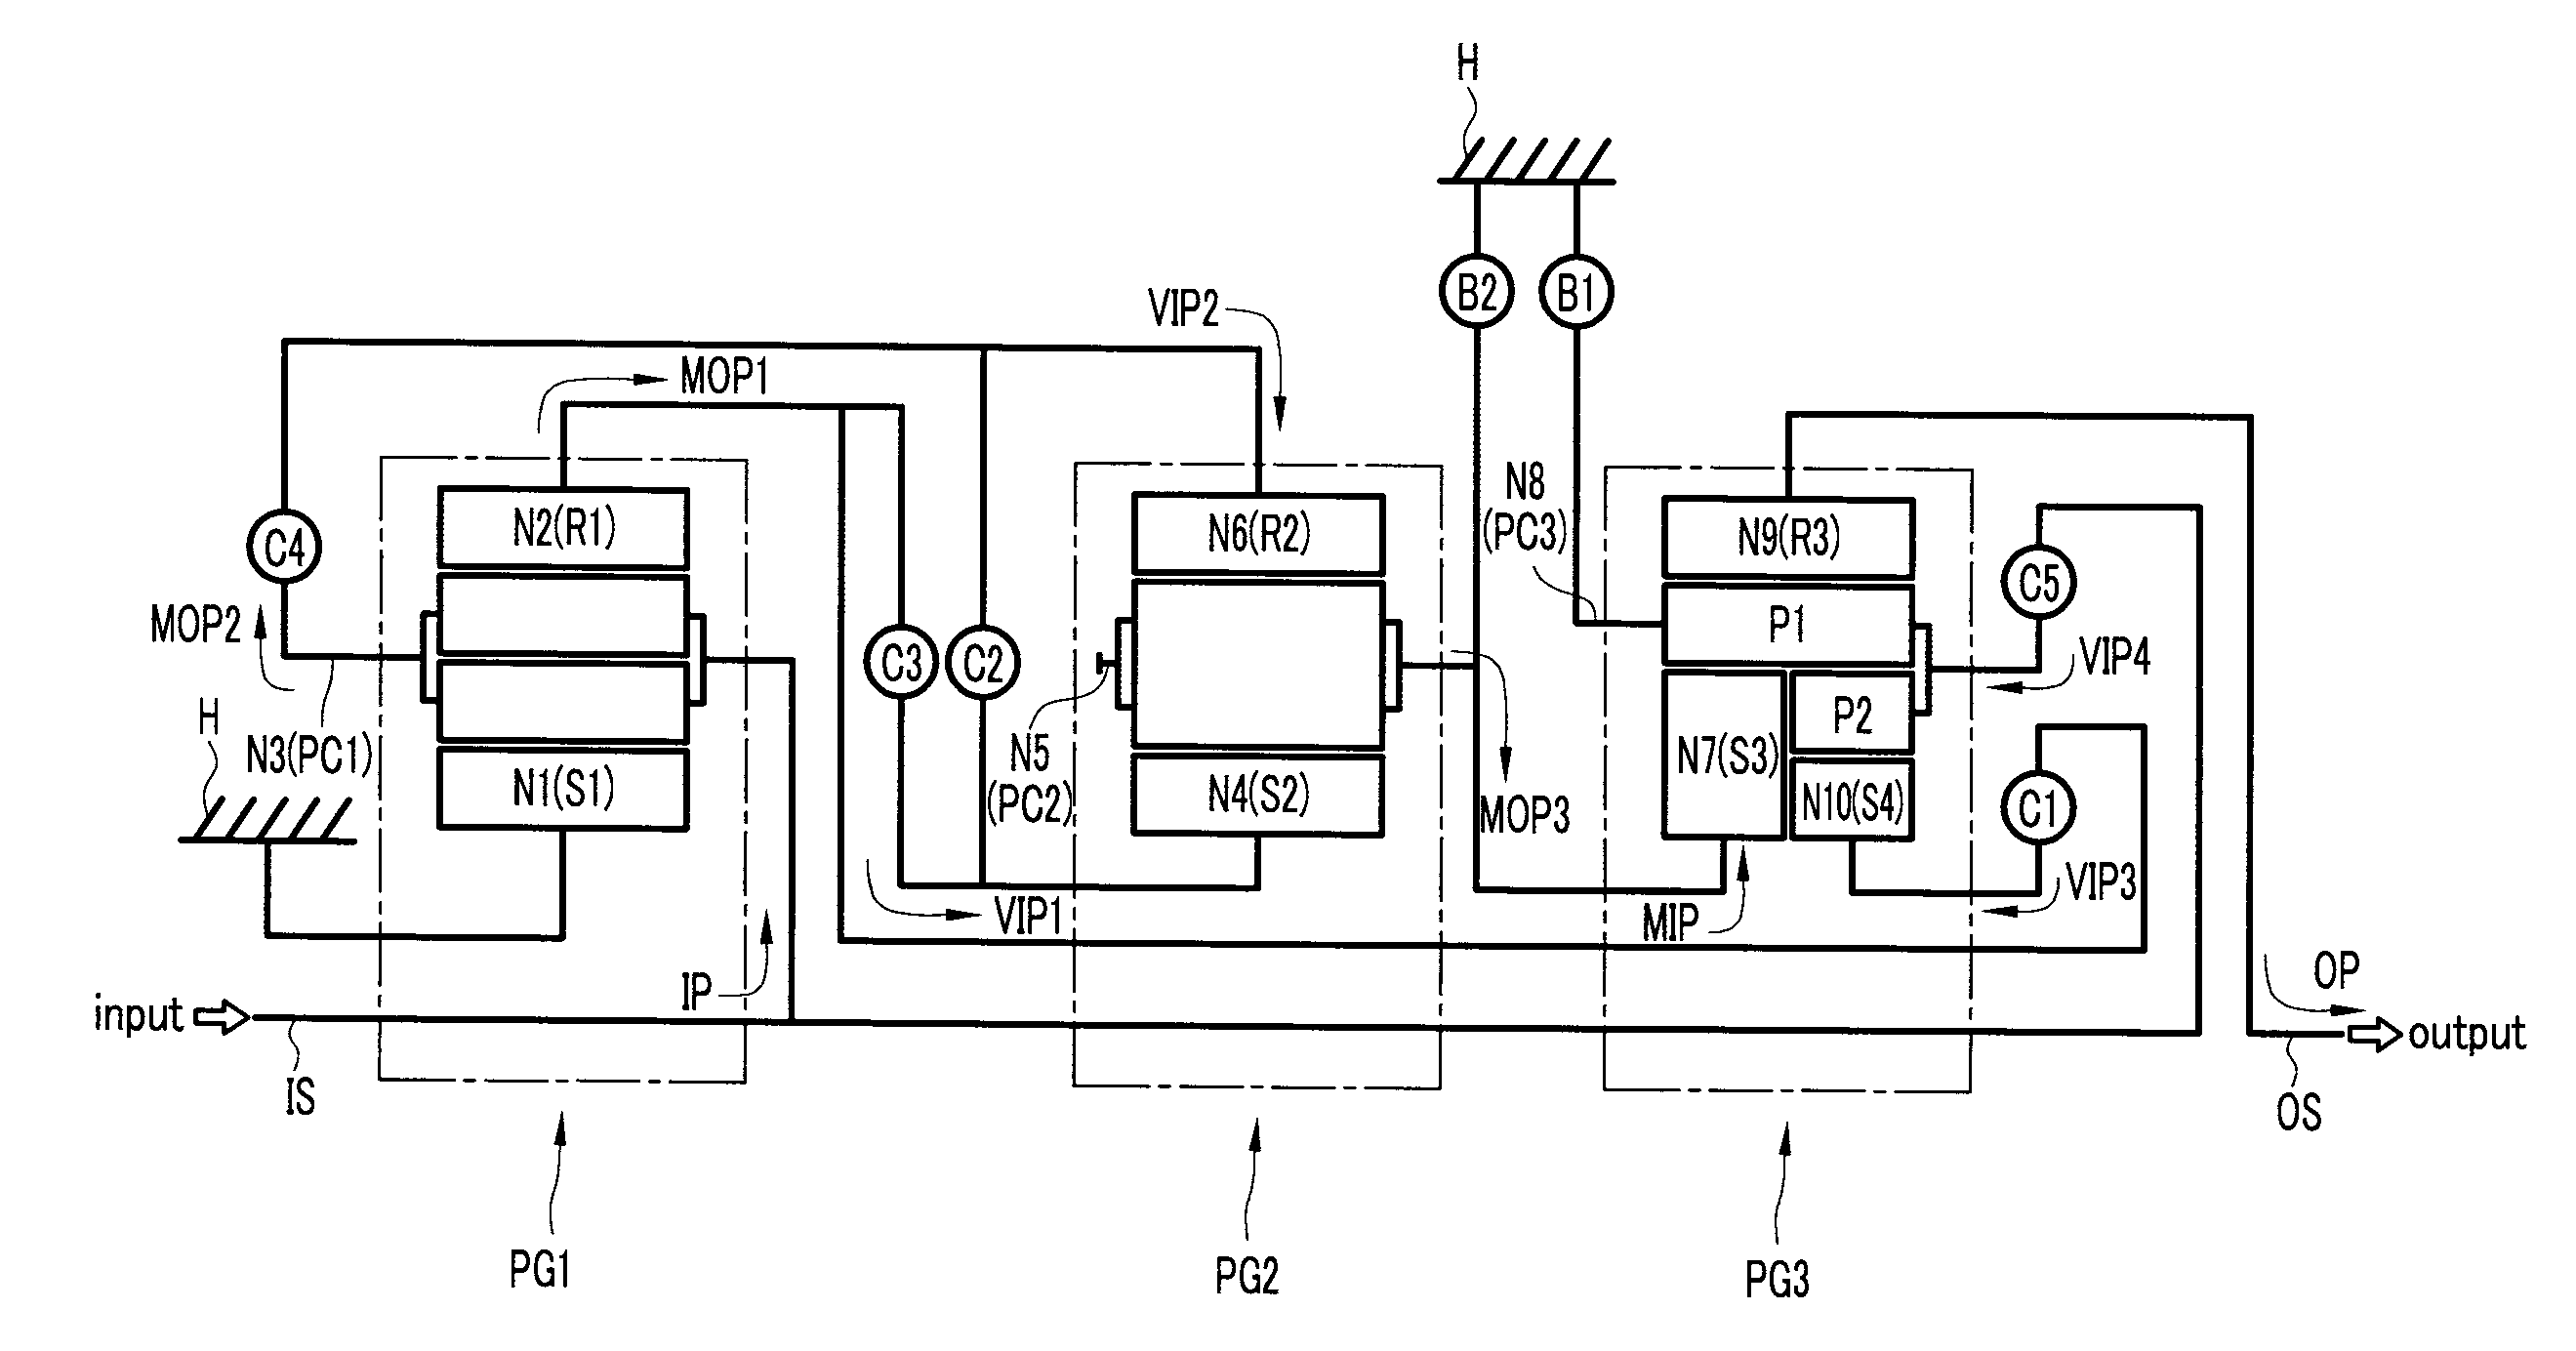 Gear Train of Automatic Transmission for a Vehicle